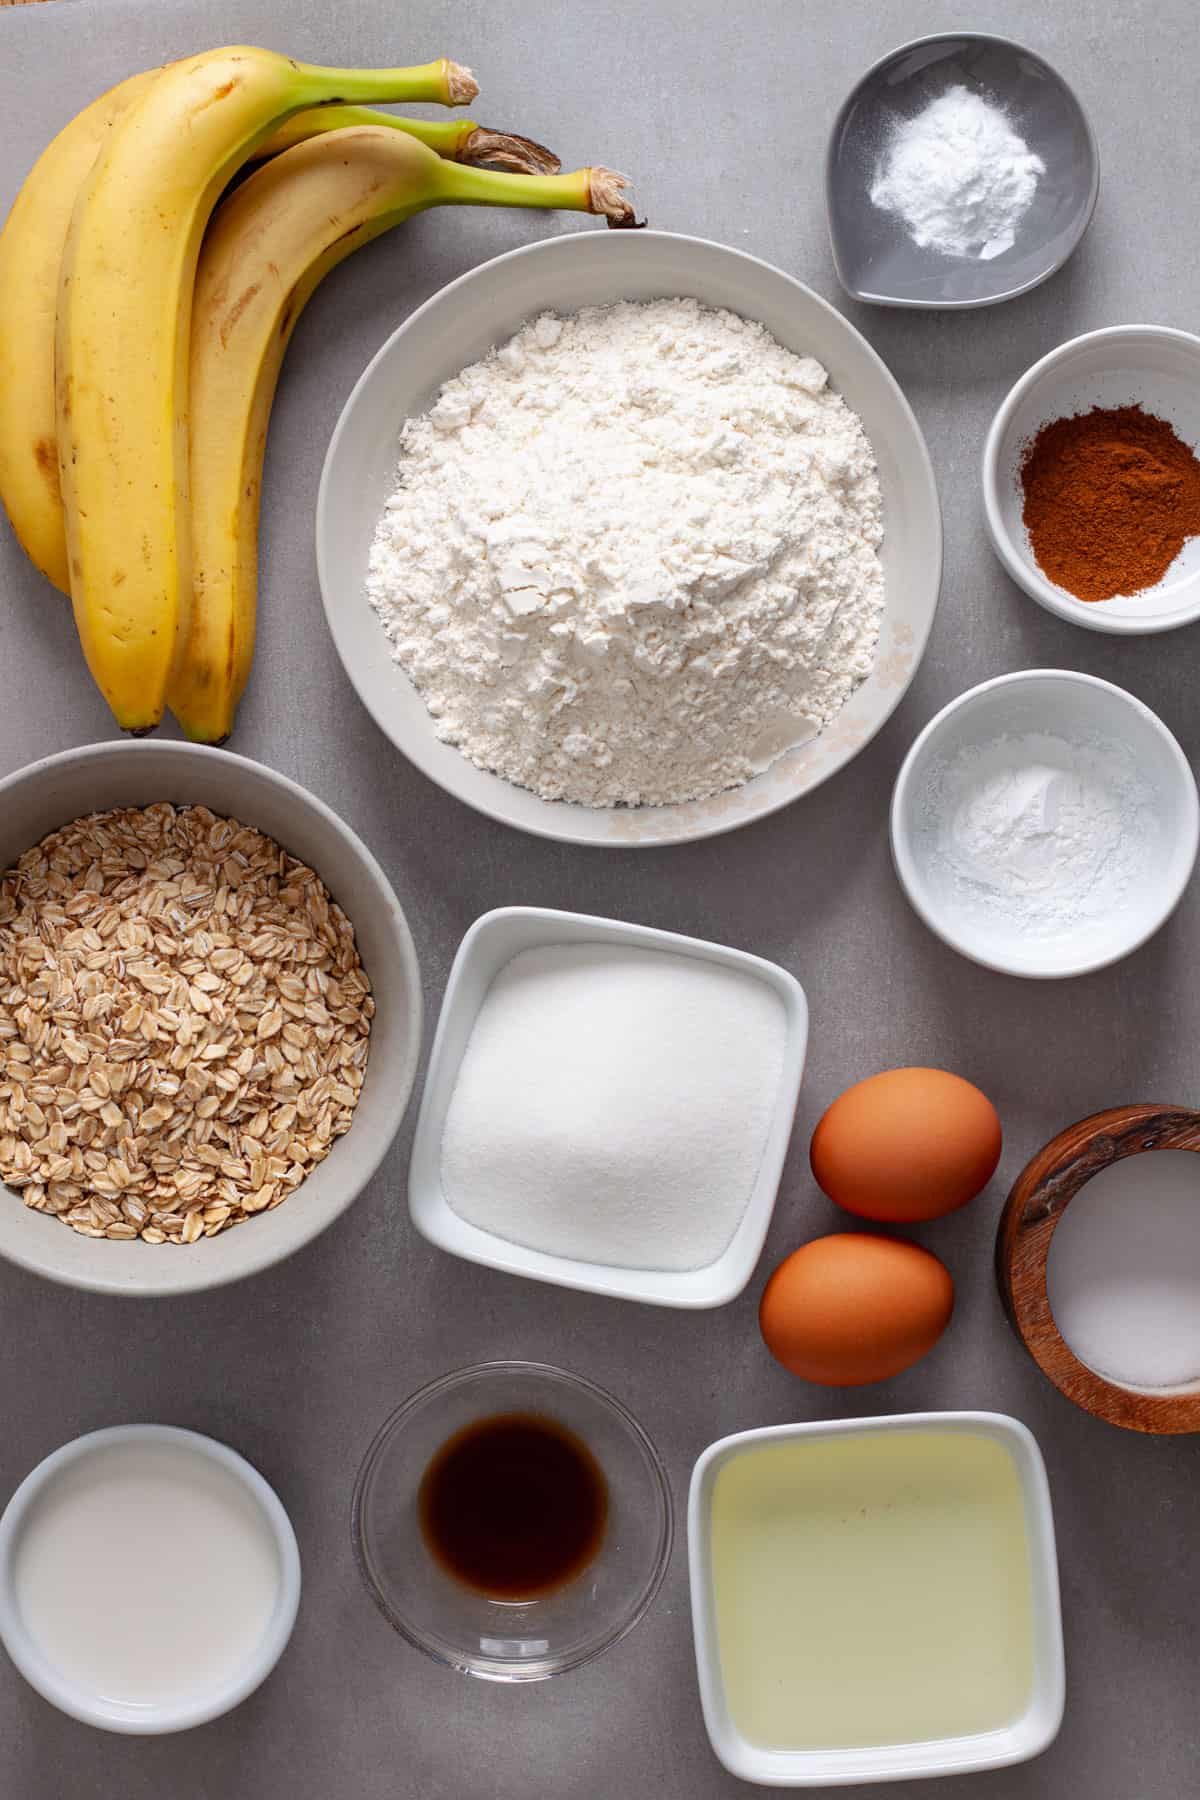 Ingredients for banana oat muffins on a gray table.